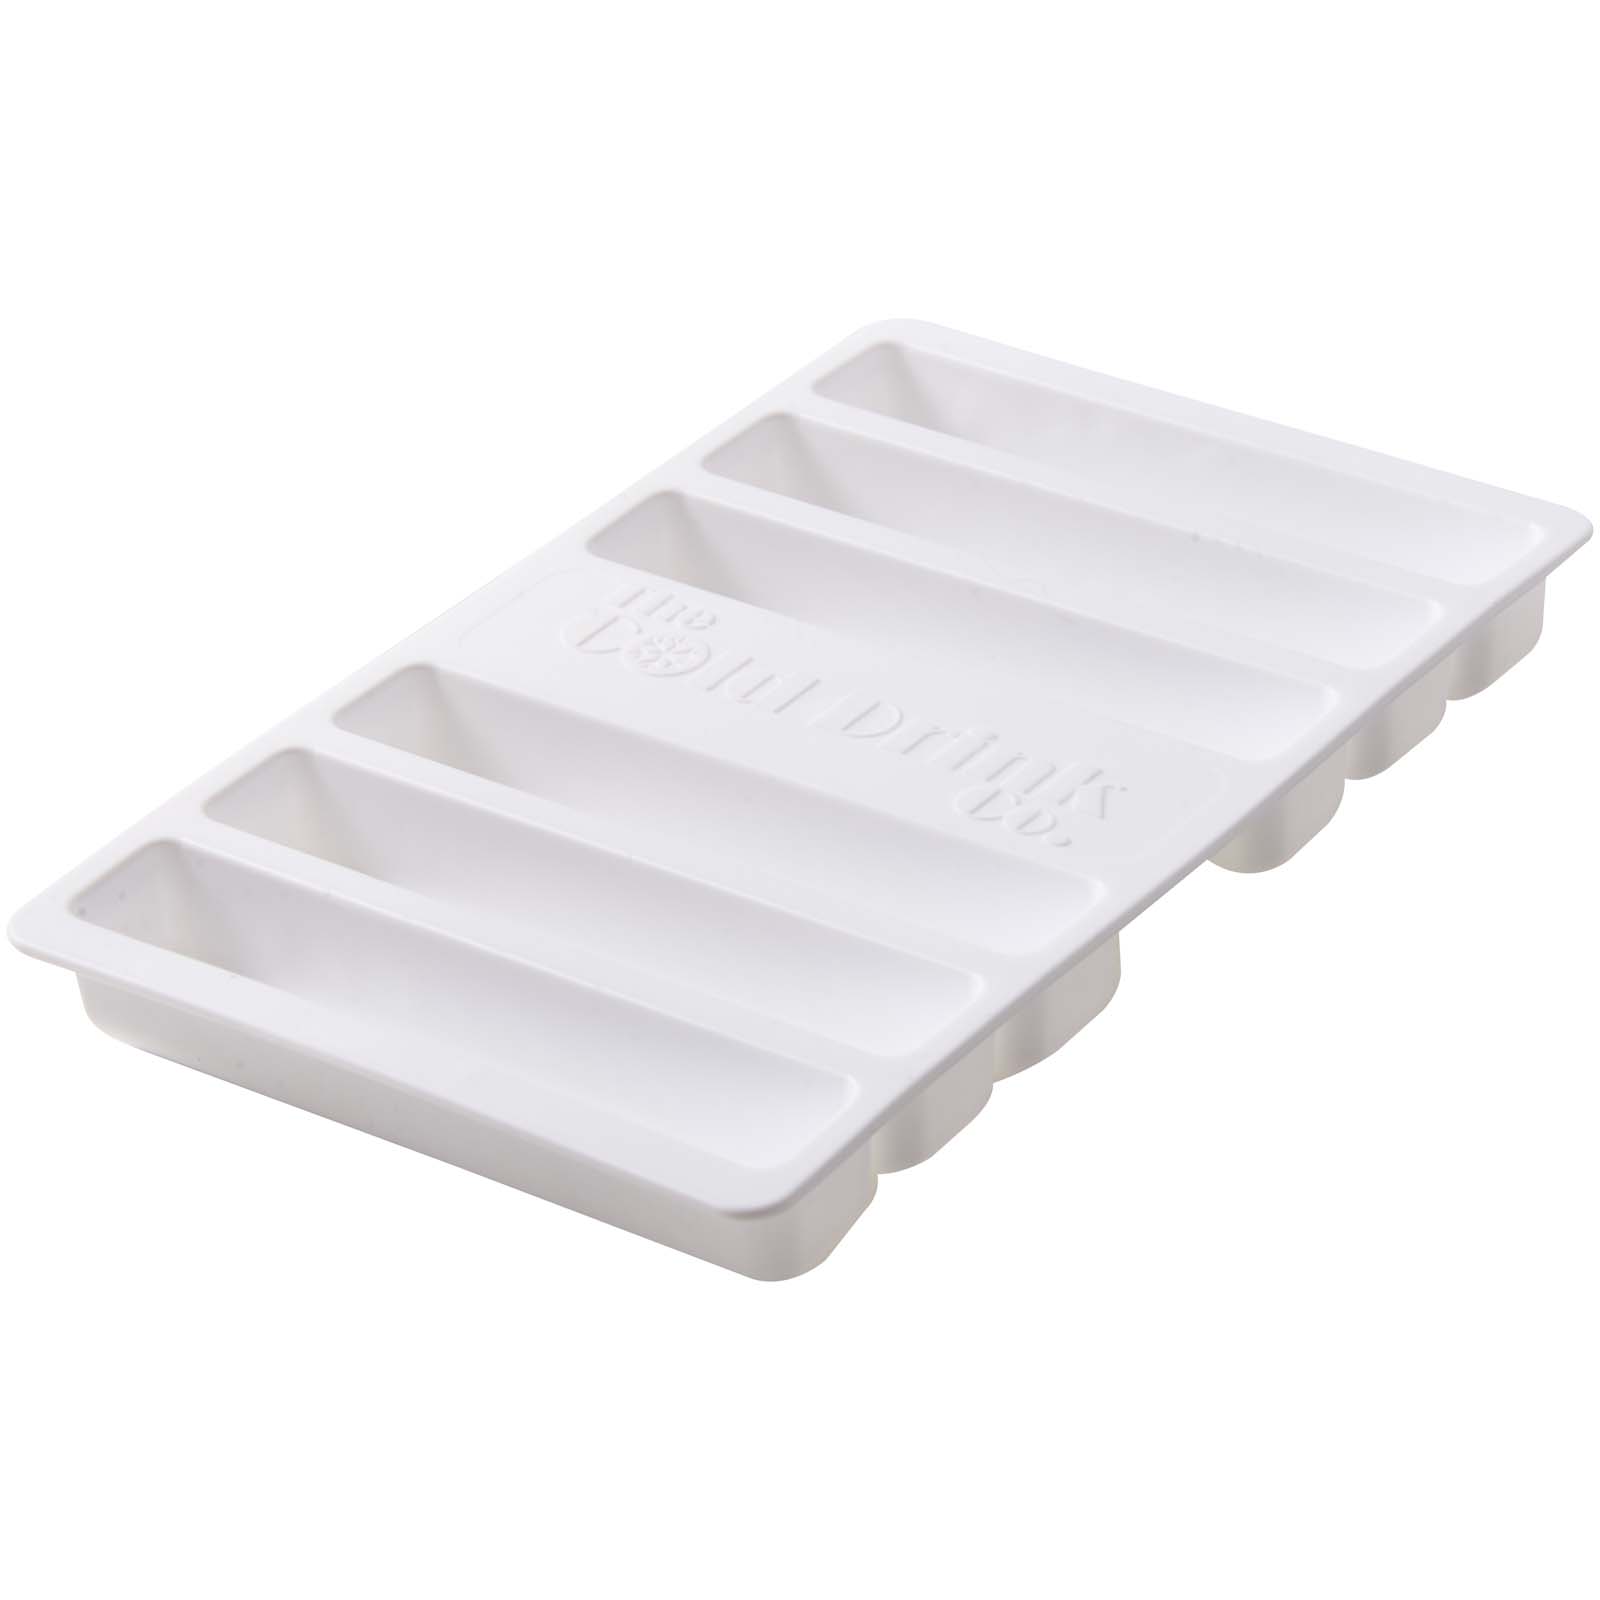 Home Accessories - Freeze-it ice stick tray